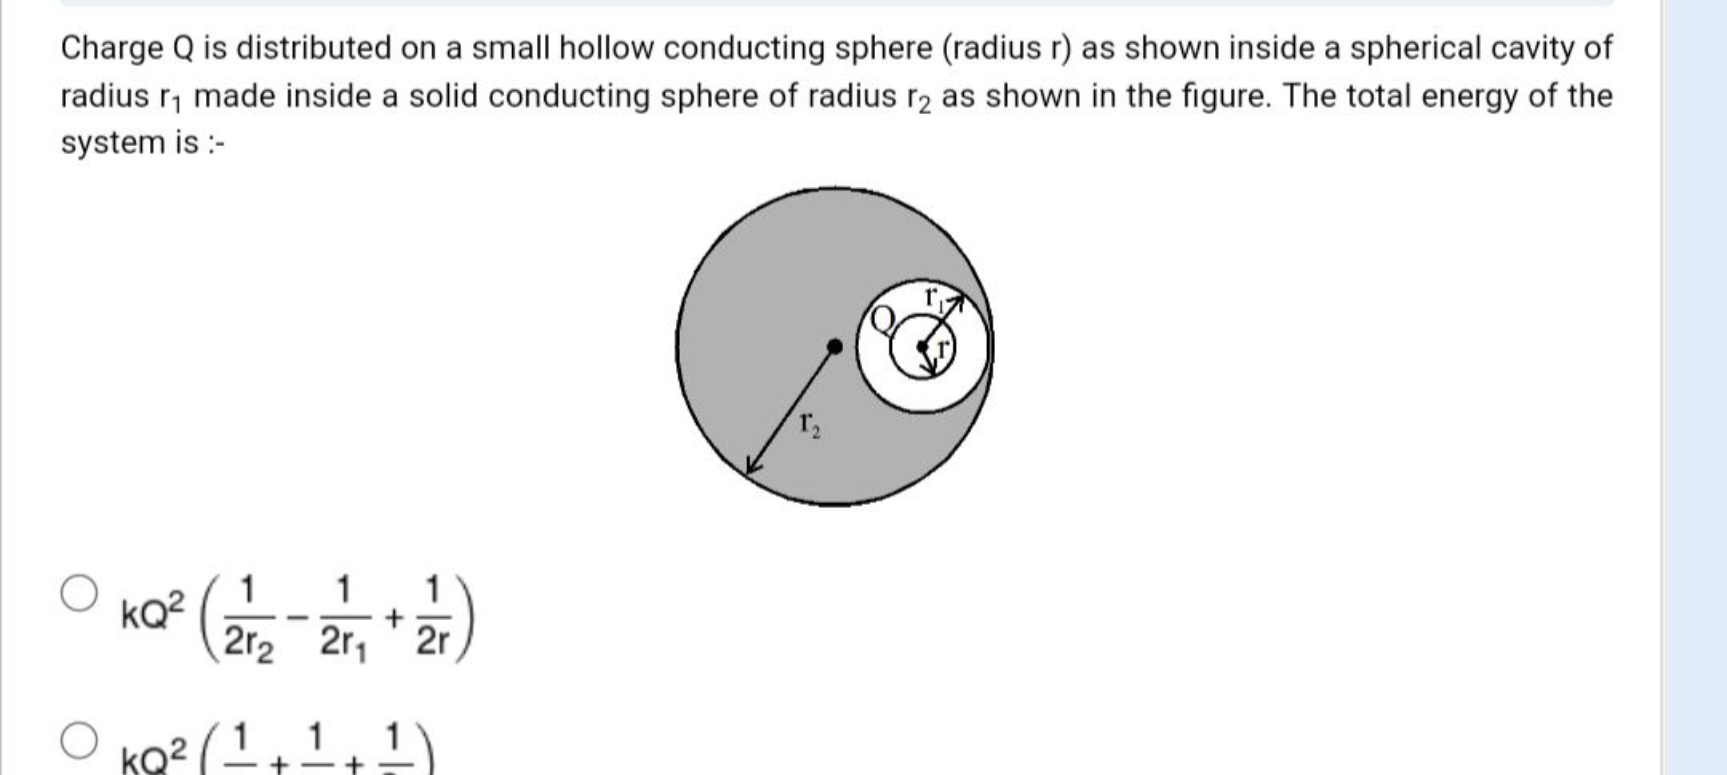 Charge Q is distributed on a small hollow conducting sphere (radius r 